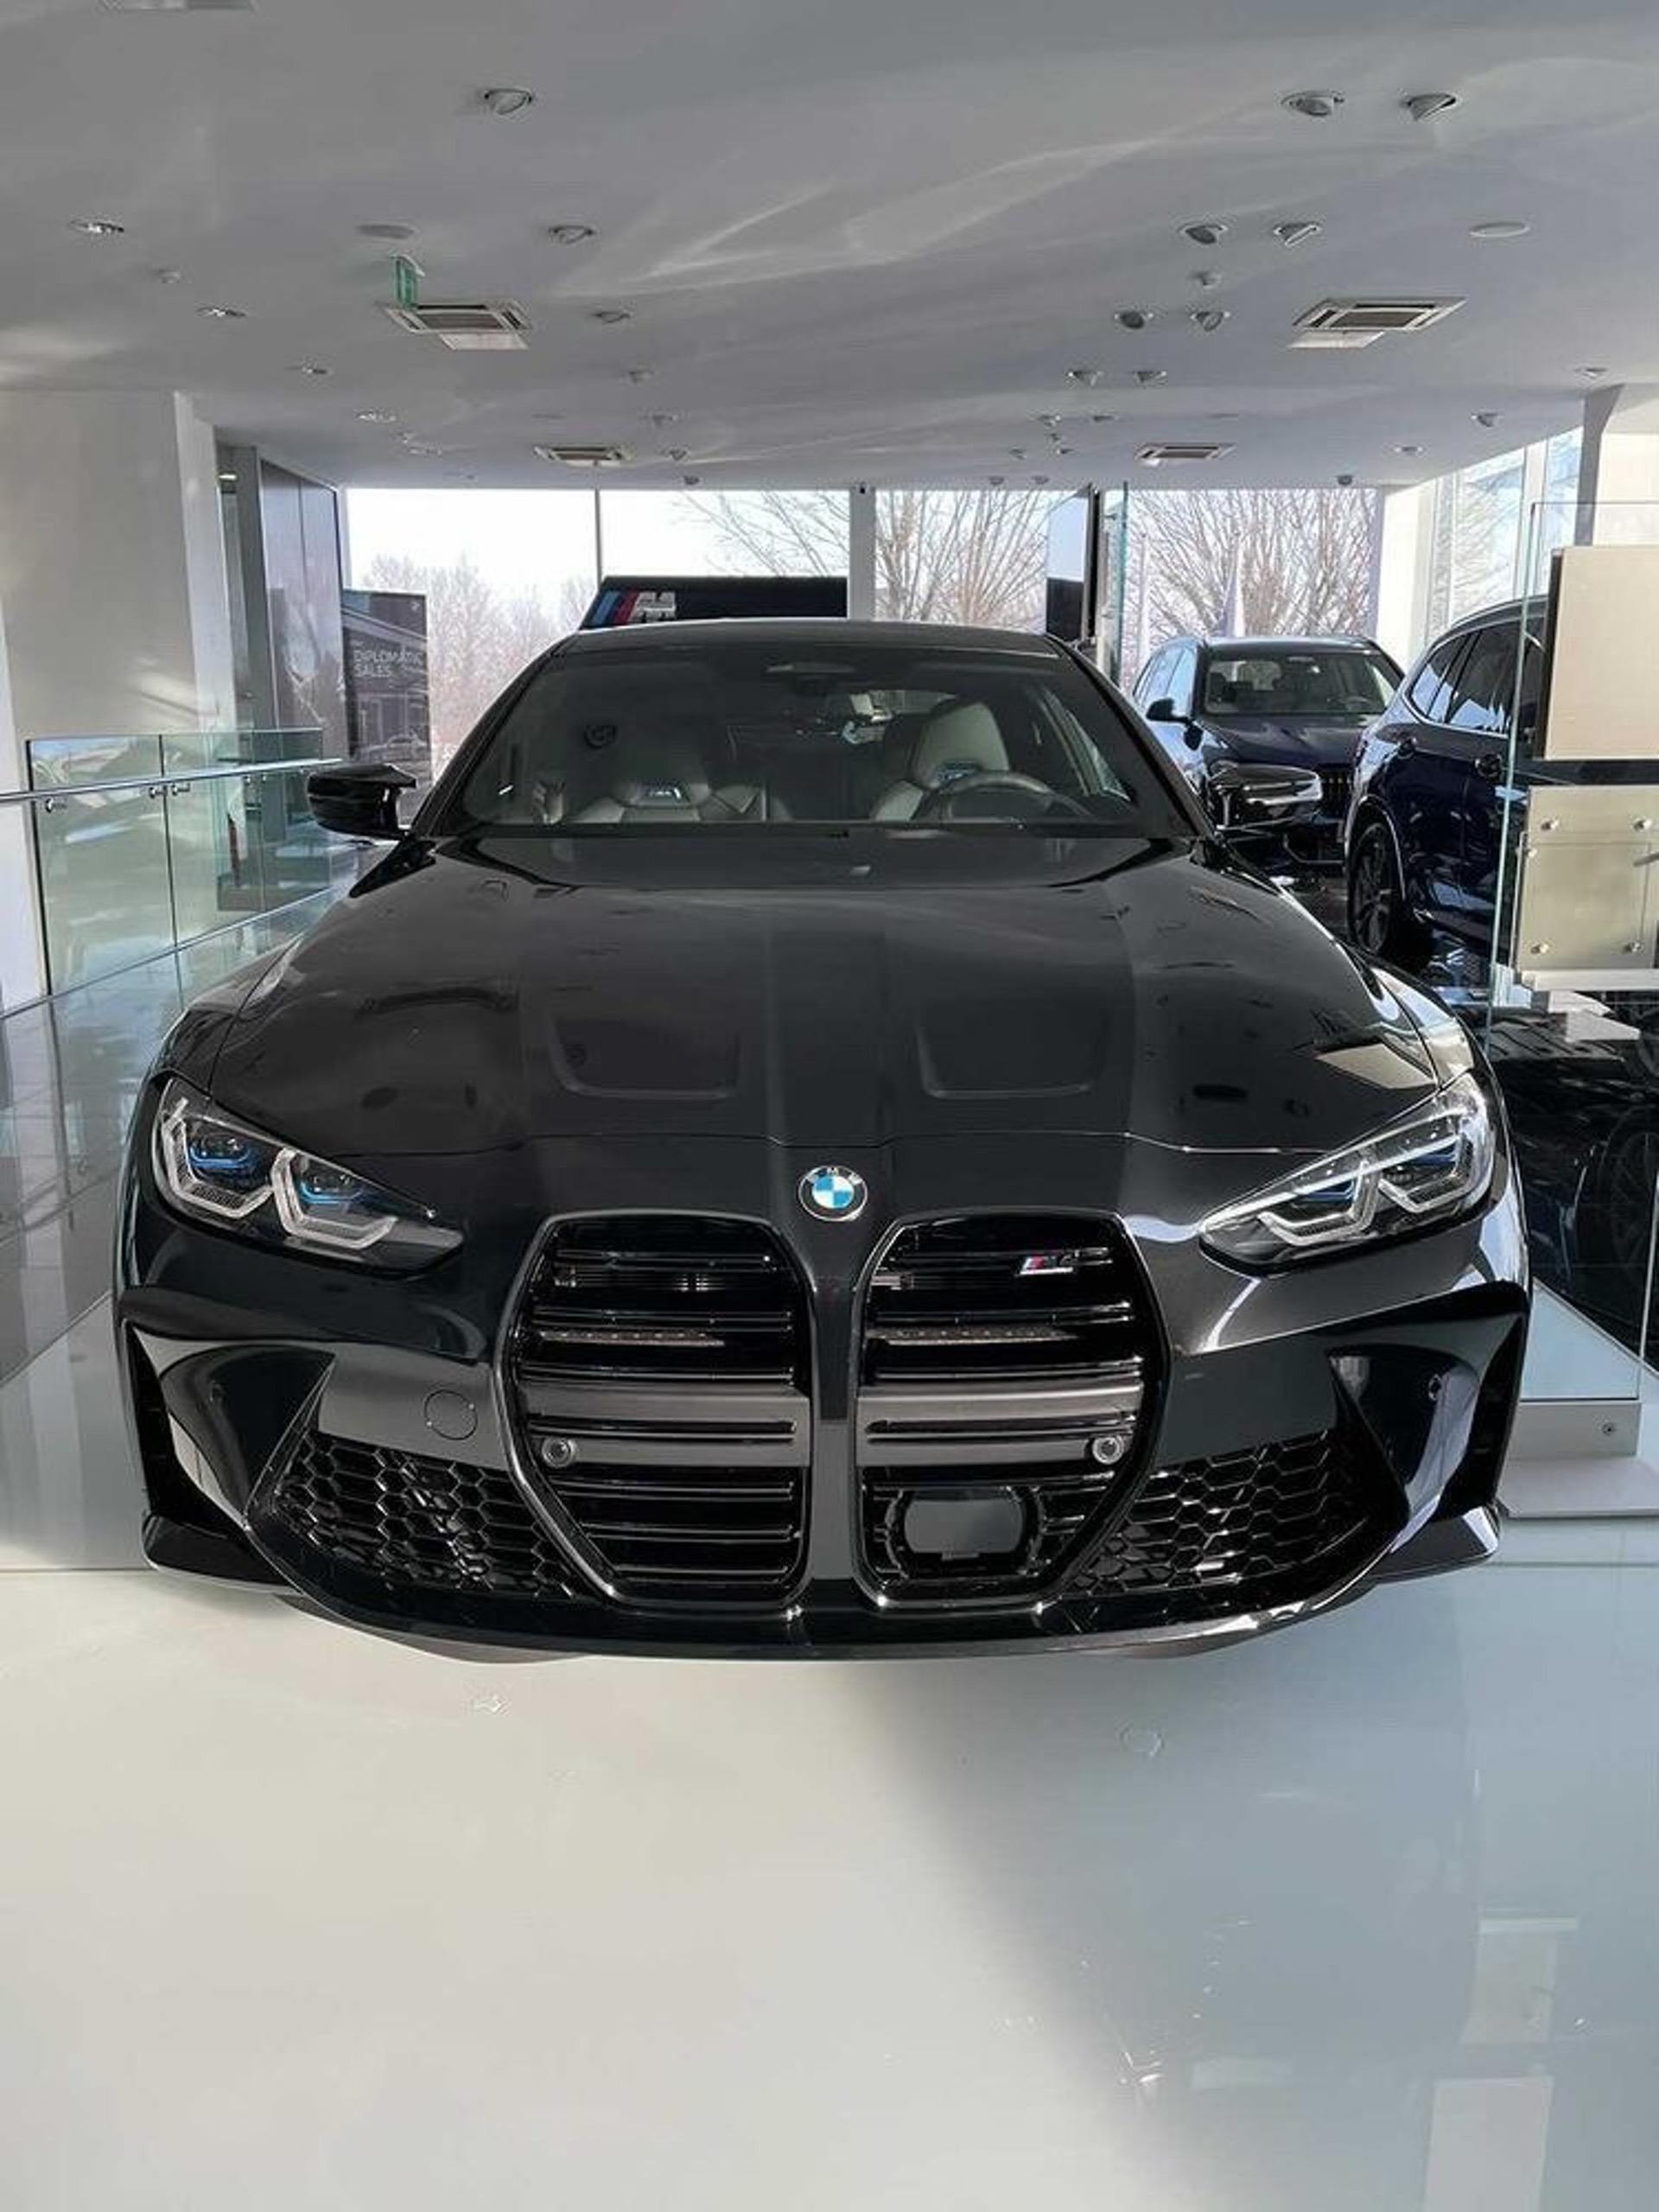 New Photos Of The 2021 Bmw M4 In Sapphire Black Metallic